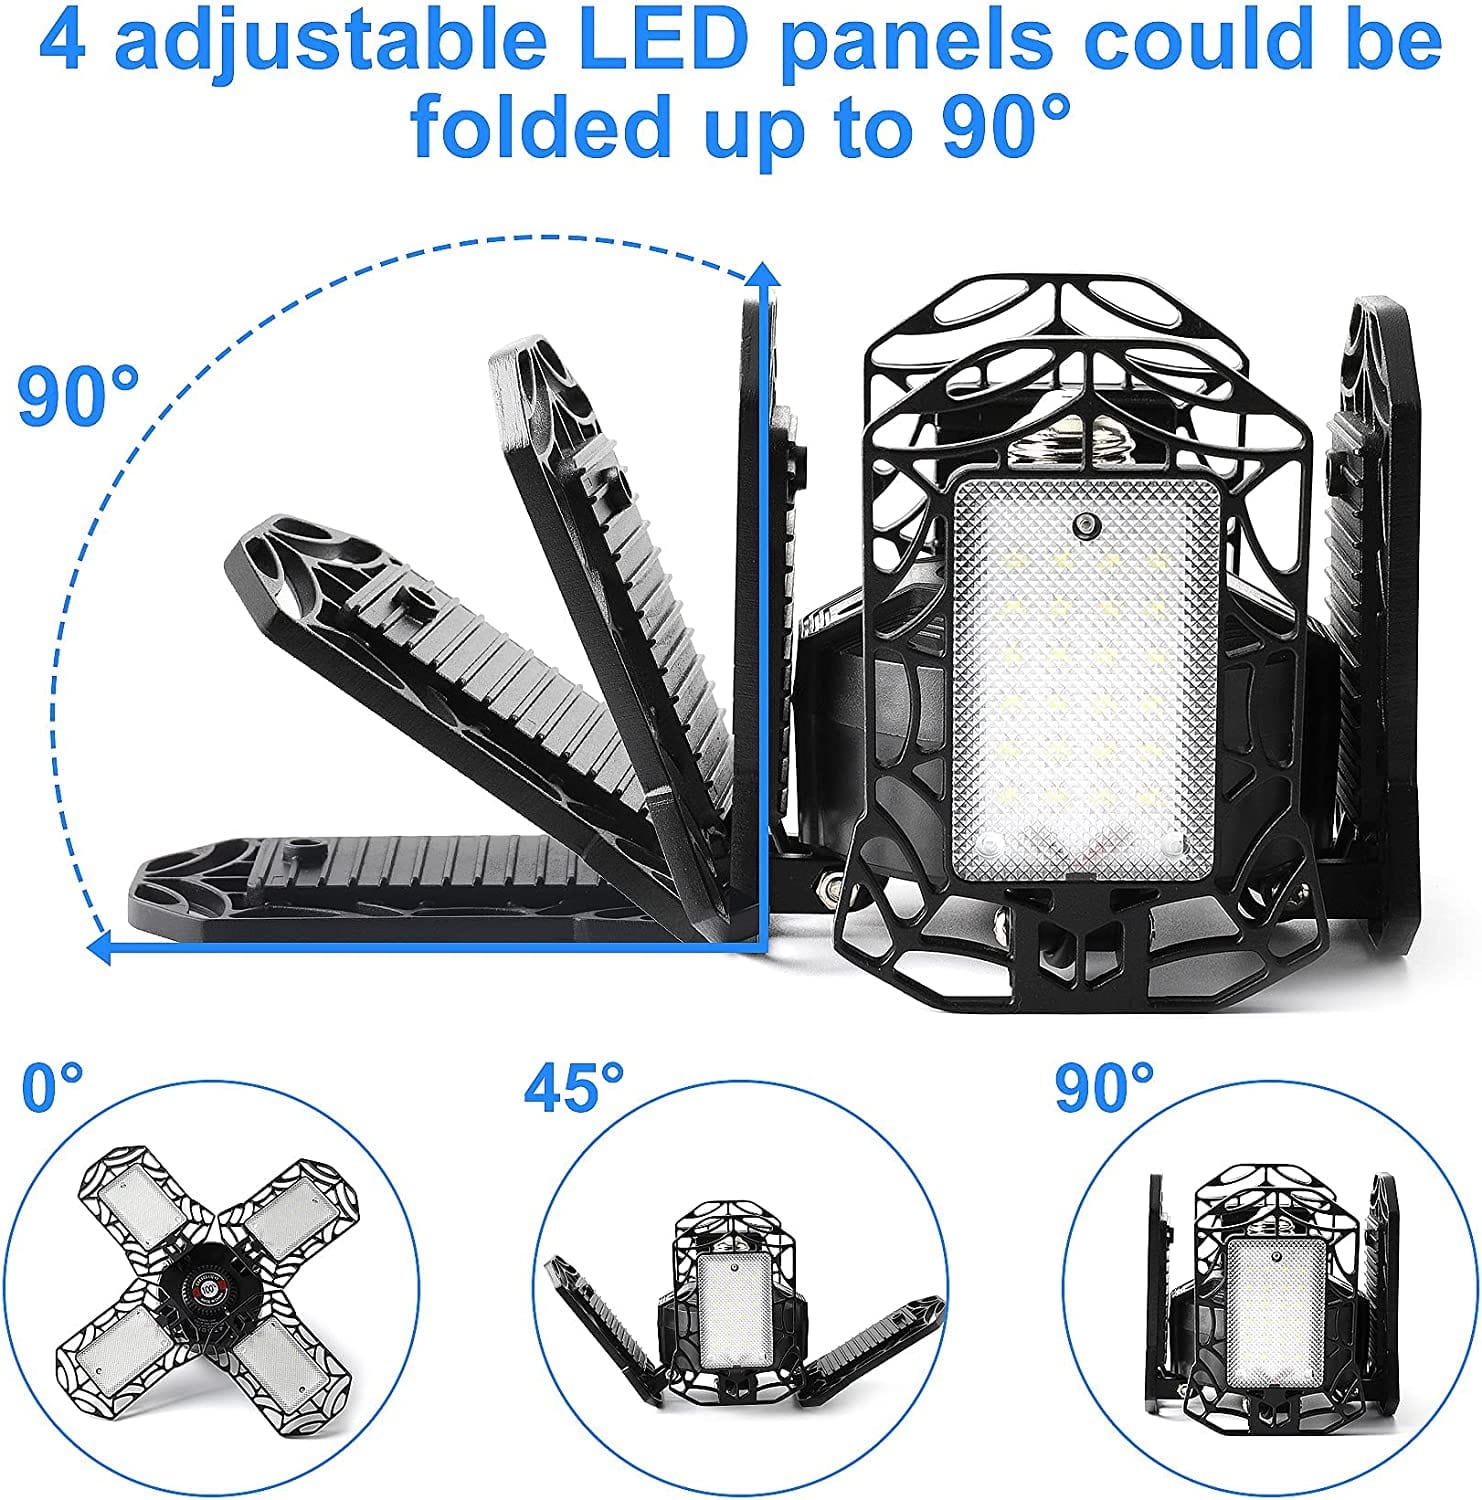 120W Ultra Bright Garage LED Deformable Ceiling Light with Adjustable Multi-Position Panels